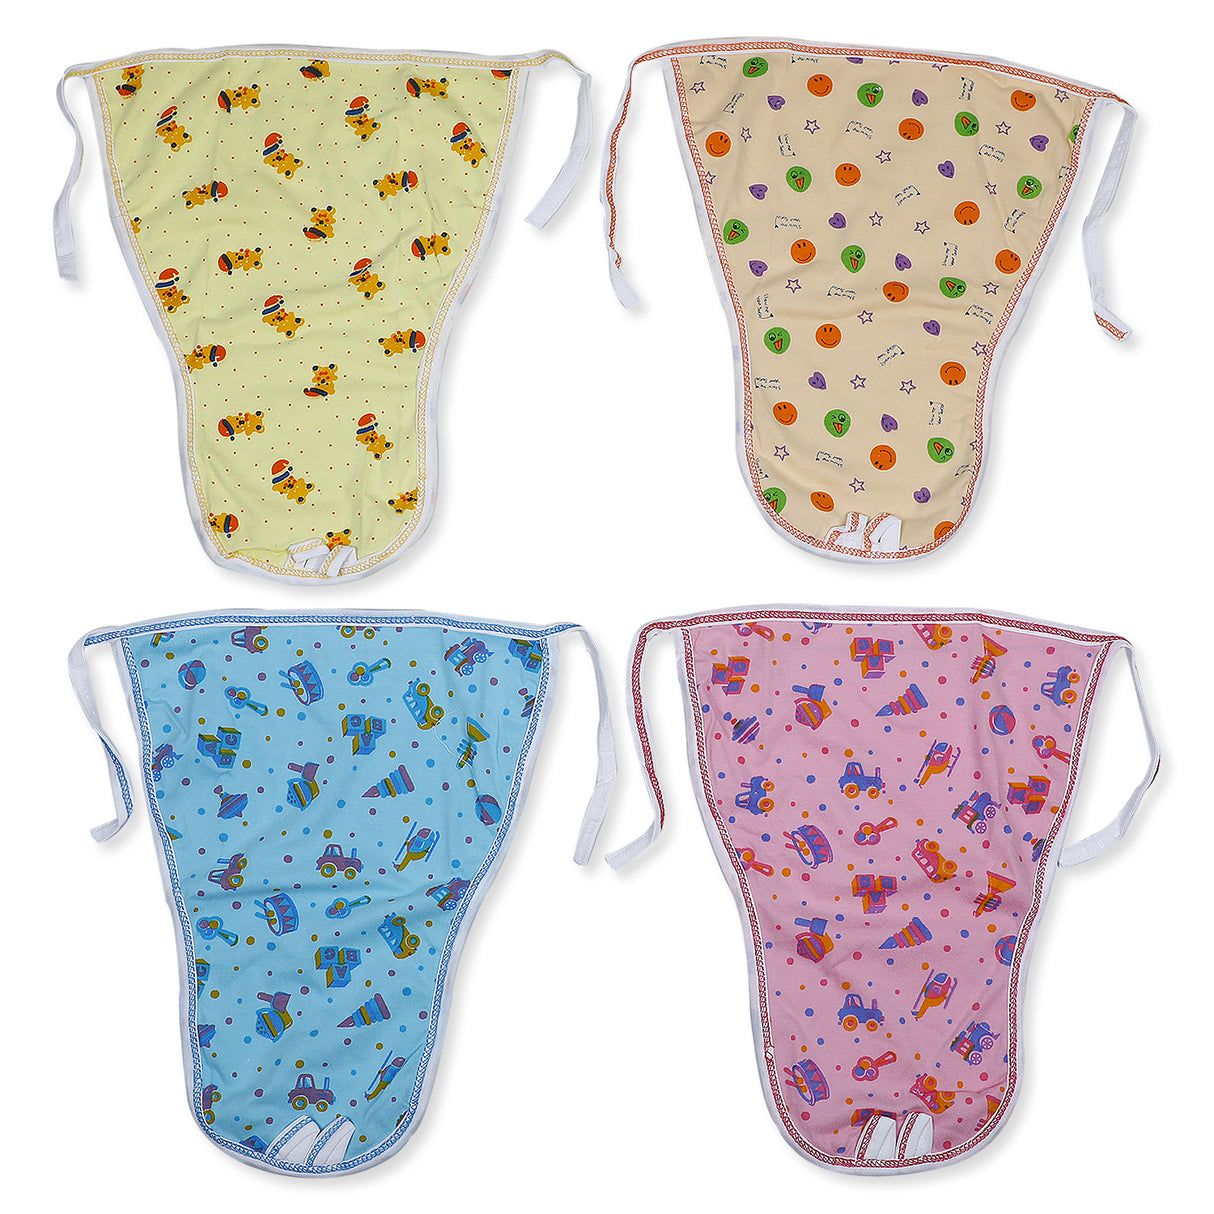 Breathable and Reusable Baby Cotton Langot